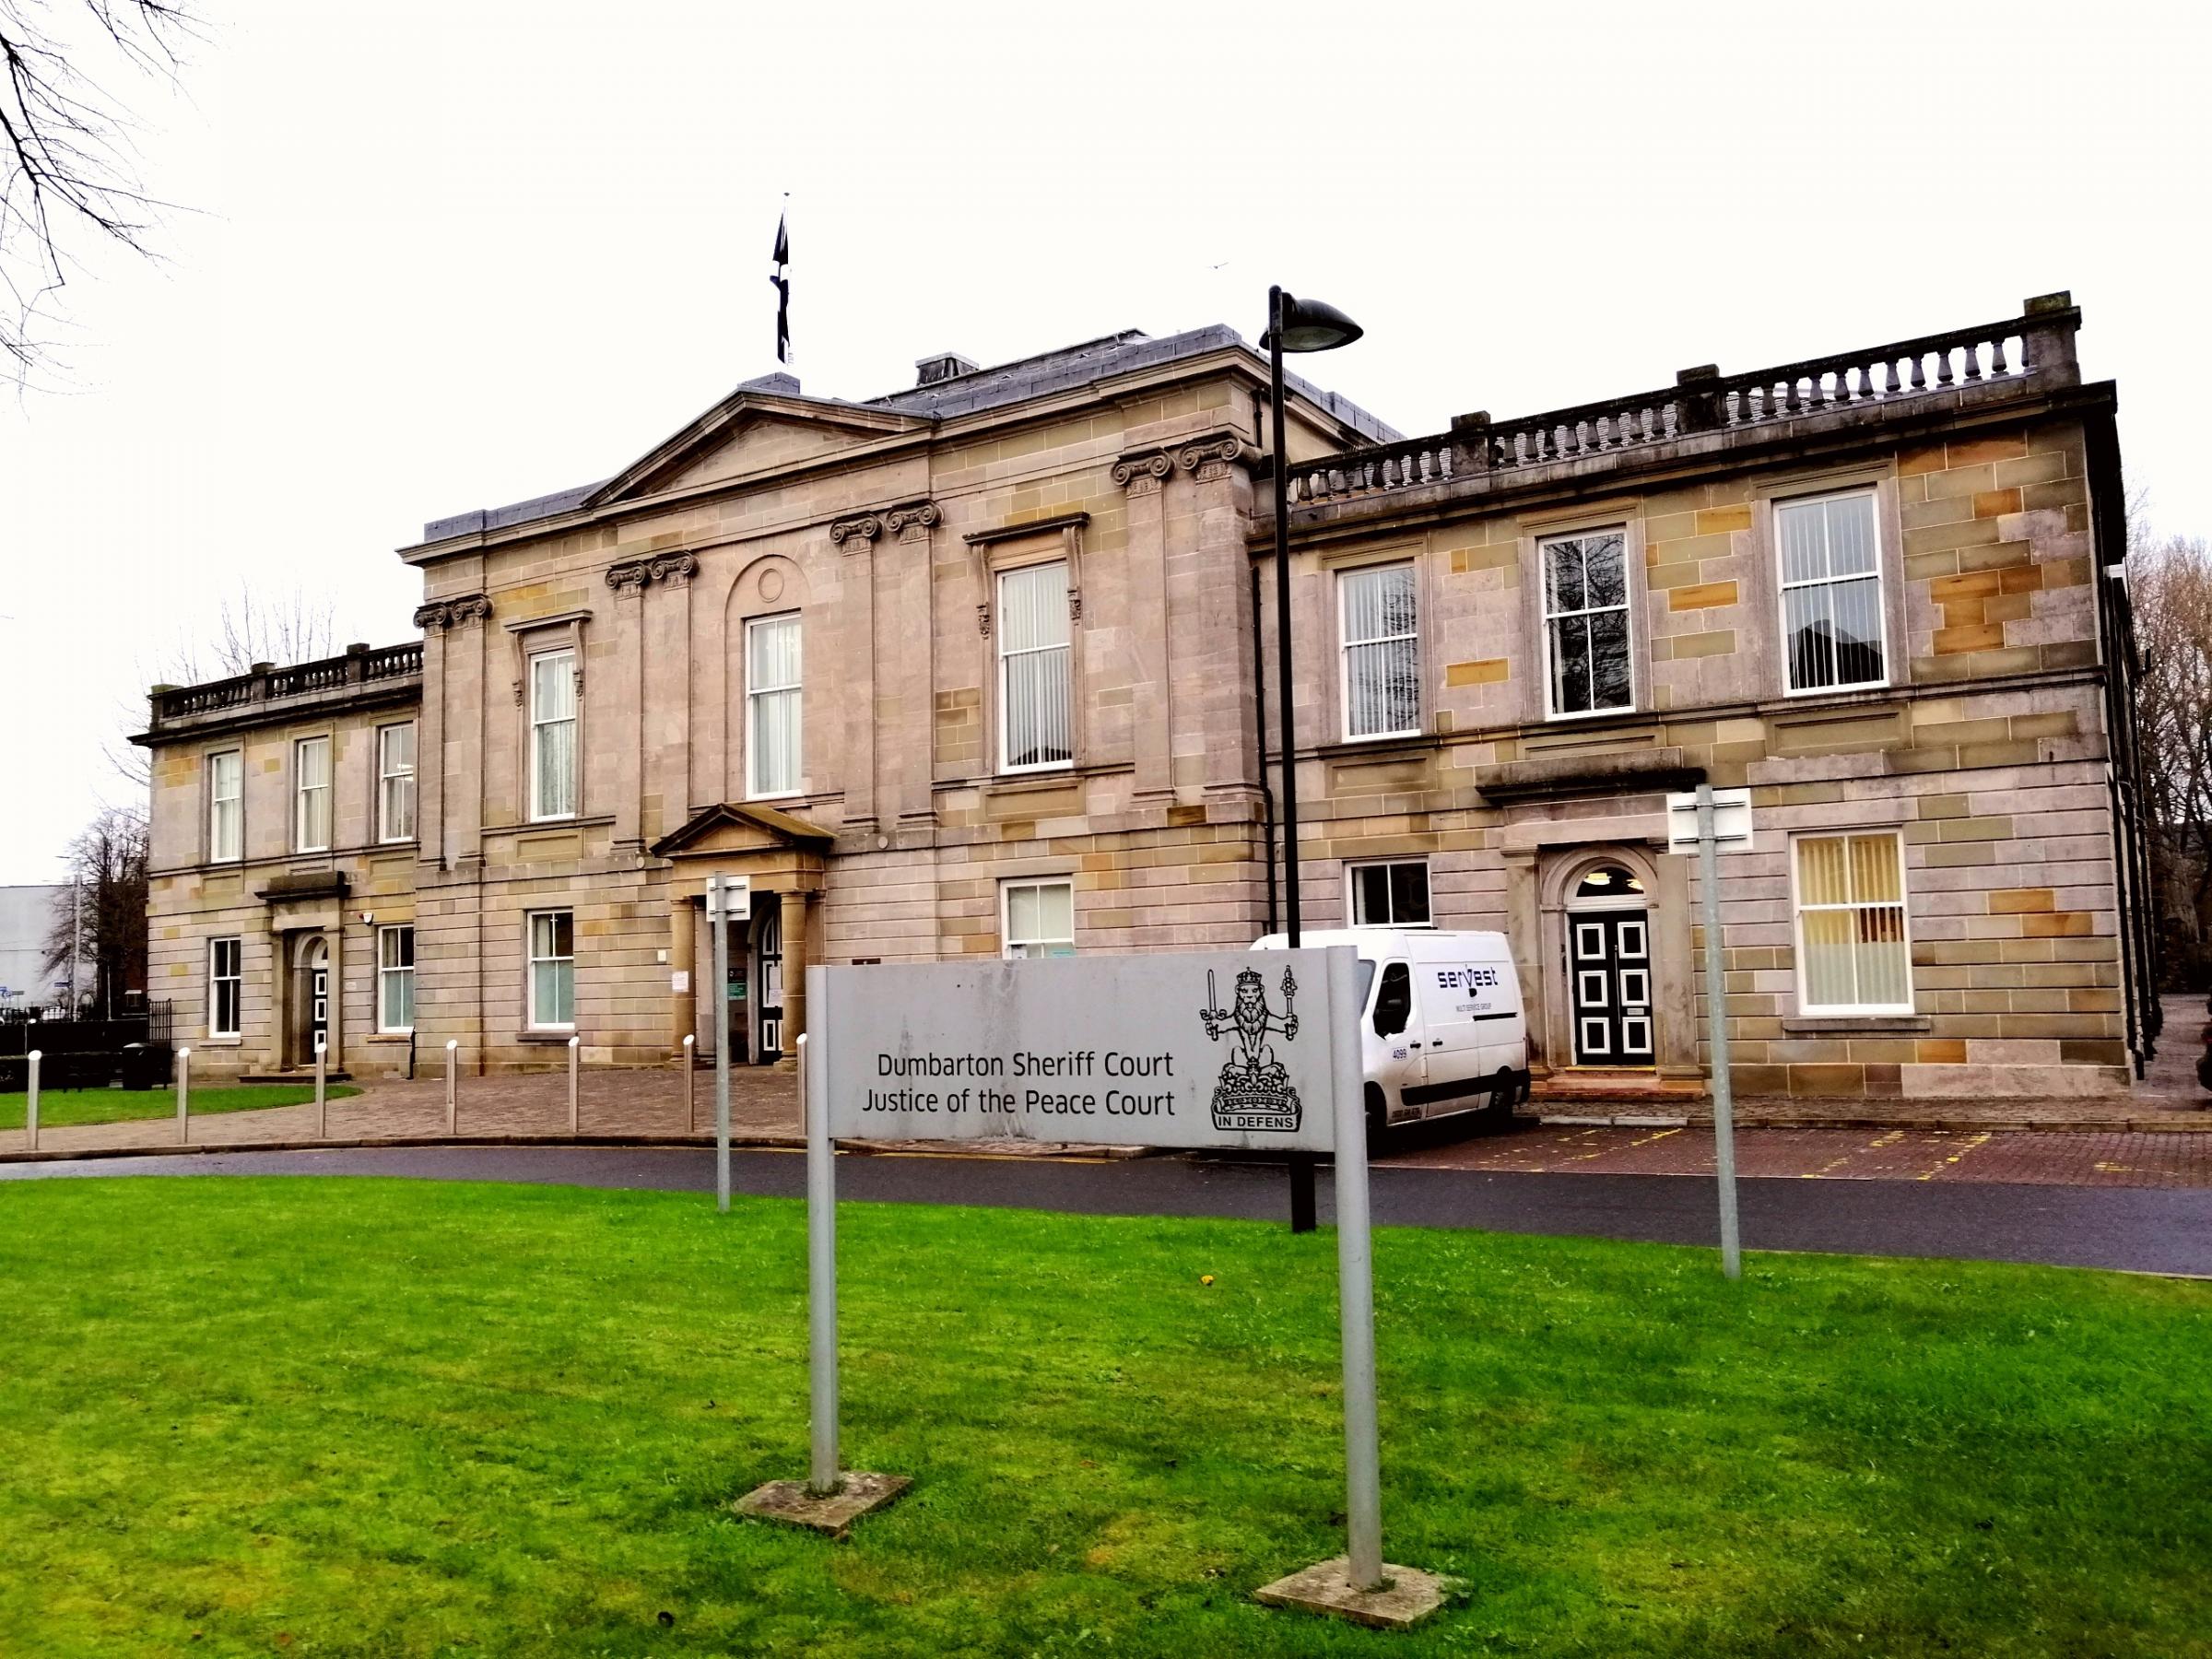 Dumbarton Sheriff Court, where Christopher OMalley and Cameron Houses owners admitted safety breaches that led to the deaths of Simon Midgley and Richard Dyson